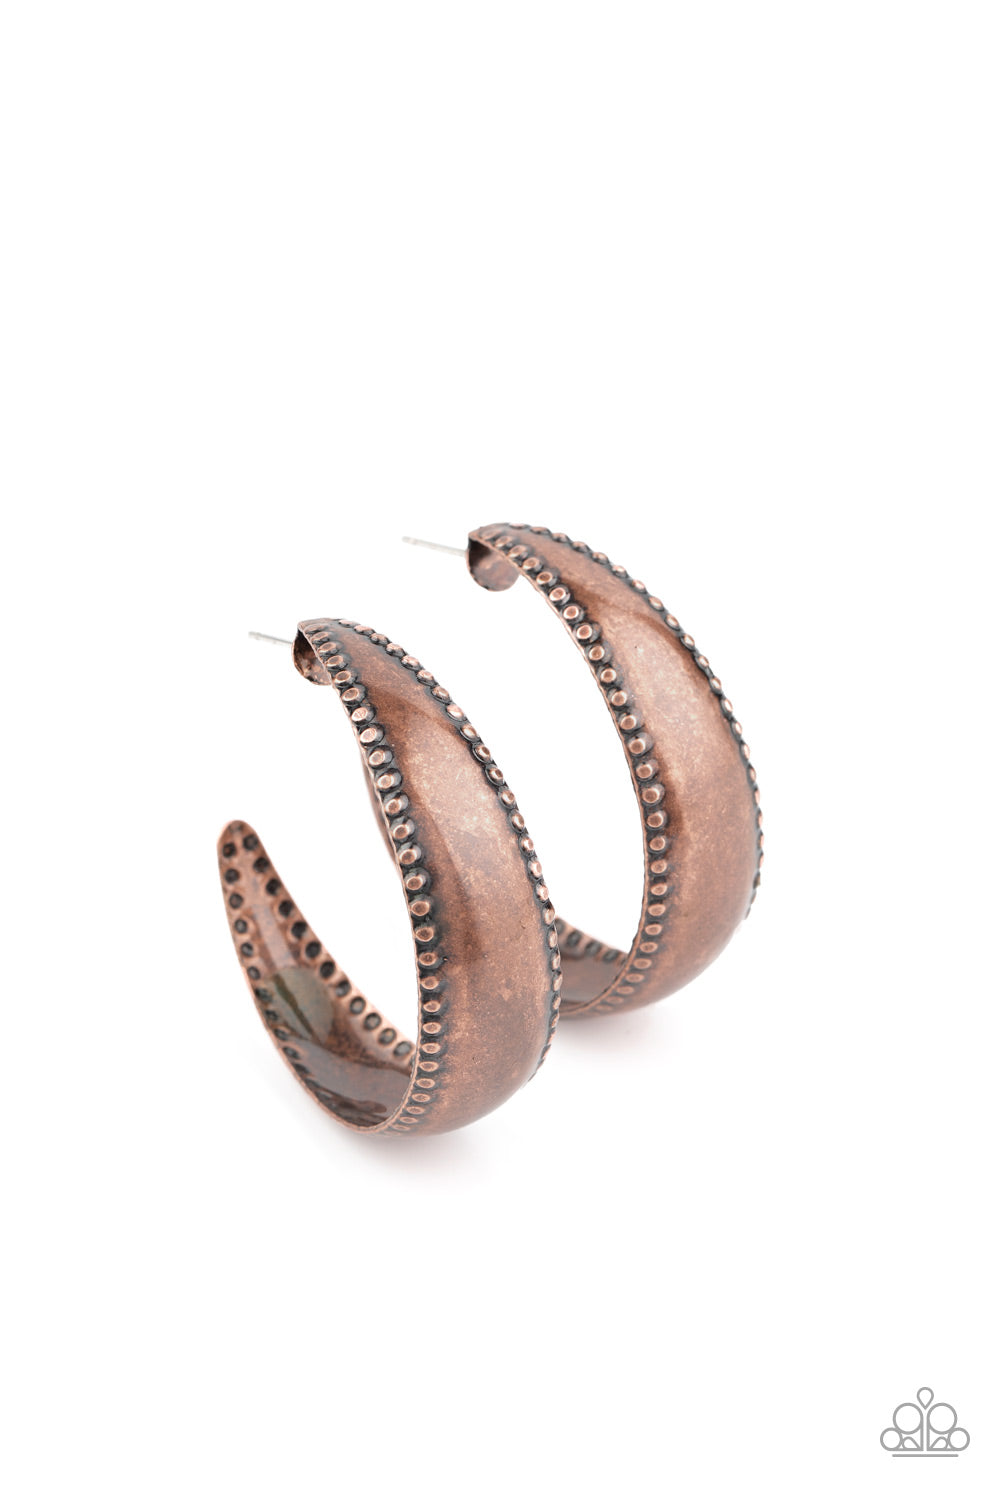 Bordered in a flattened studded pattern, an antiqued copper hoop curls into a dainty hoop for a rustic flair. Earring attaches to a standard post fitting. Hoop measures approximately 1 1/2